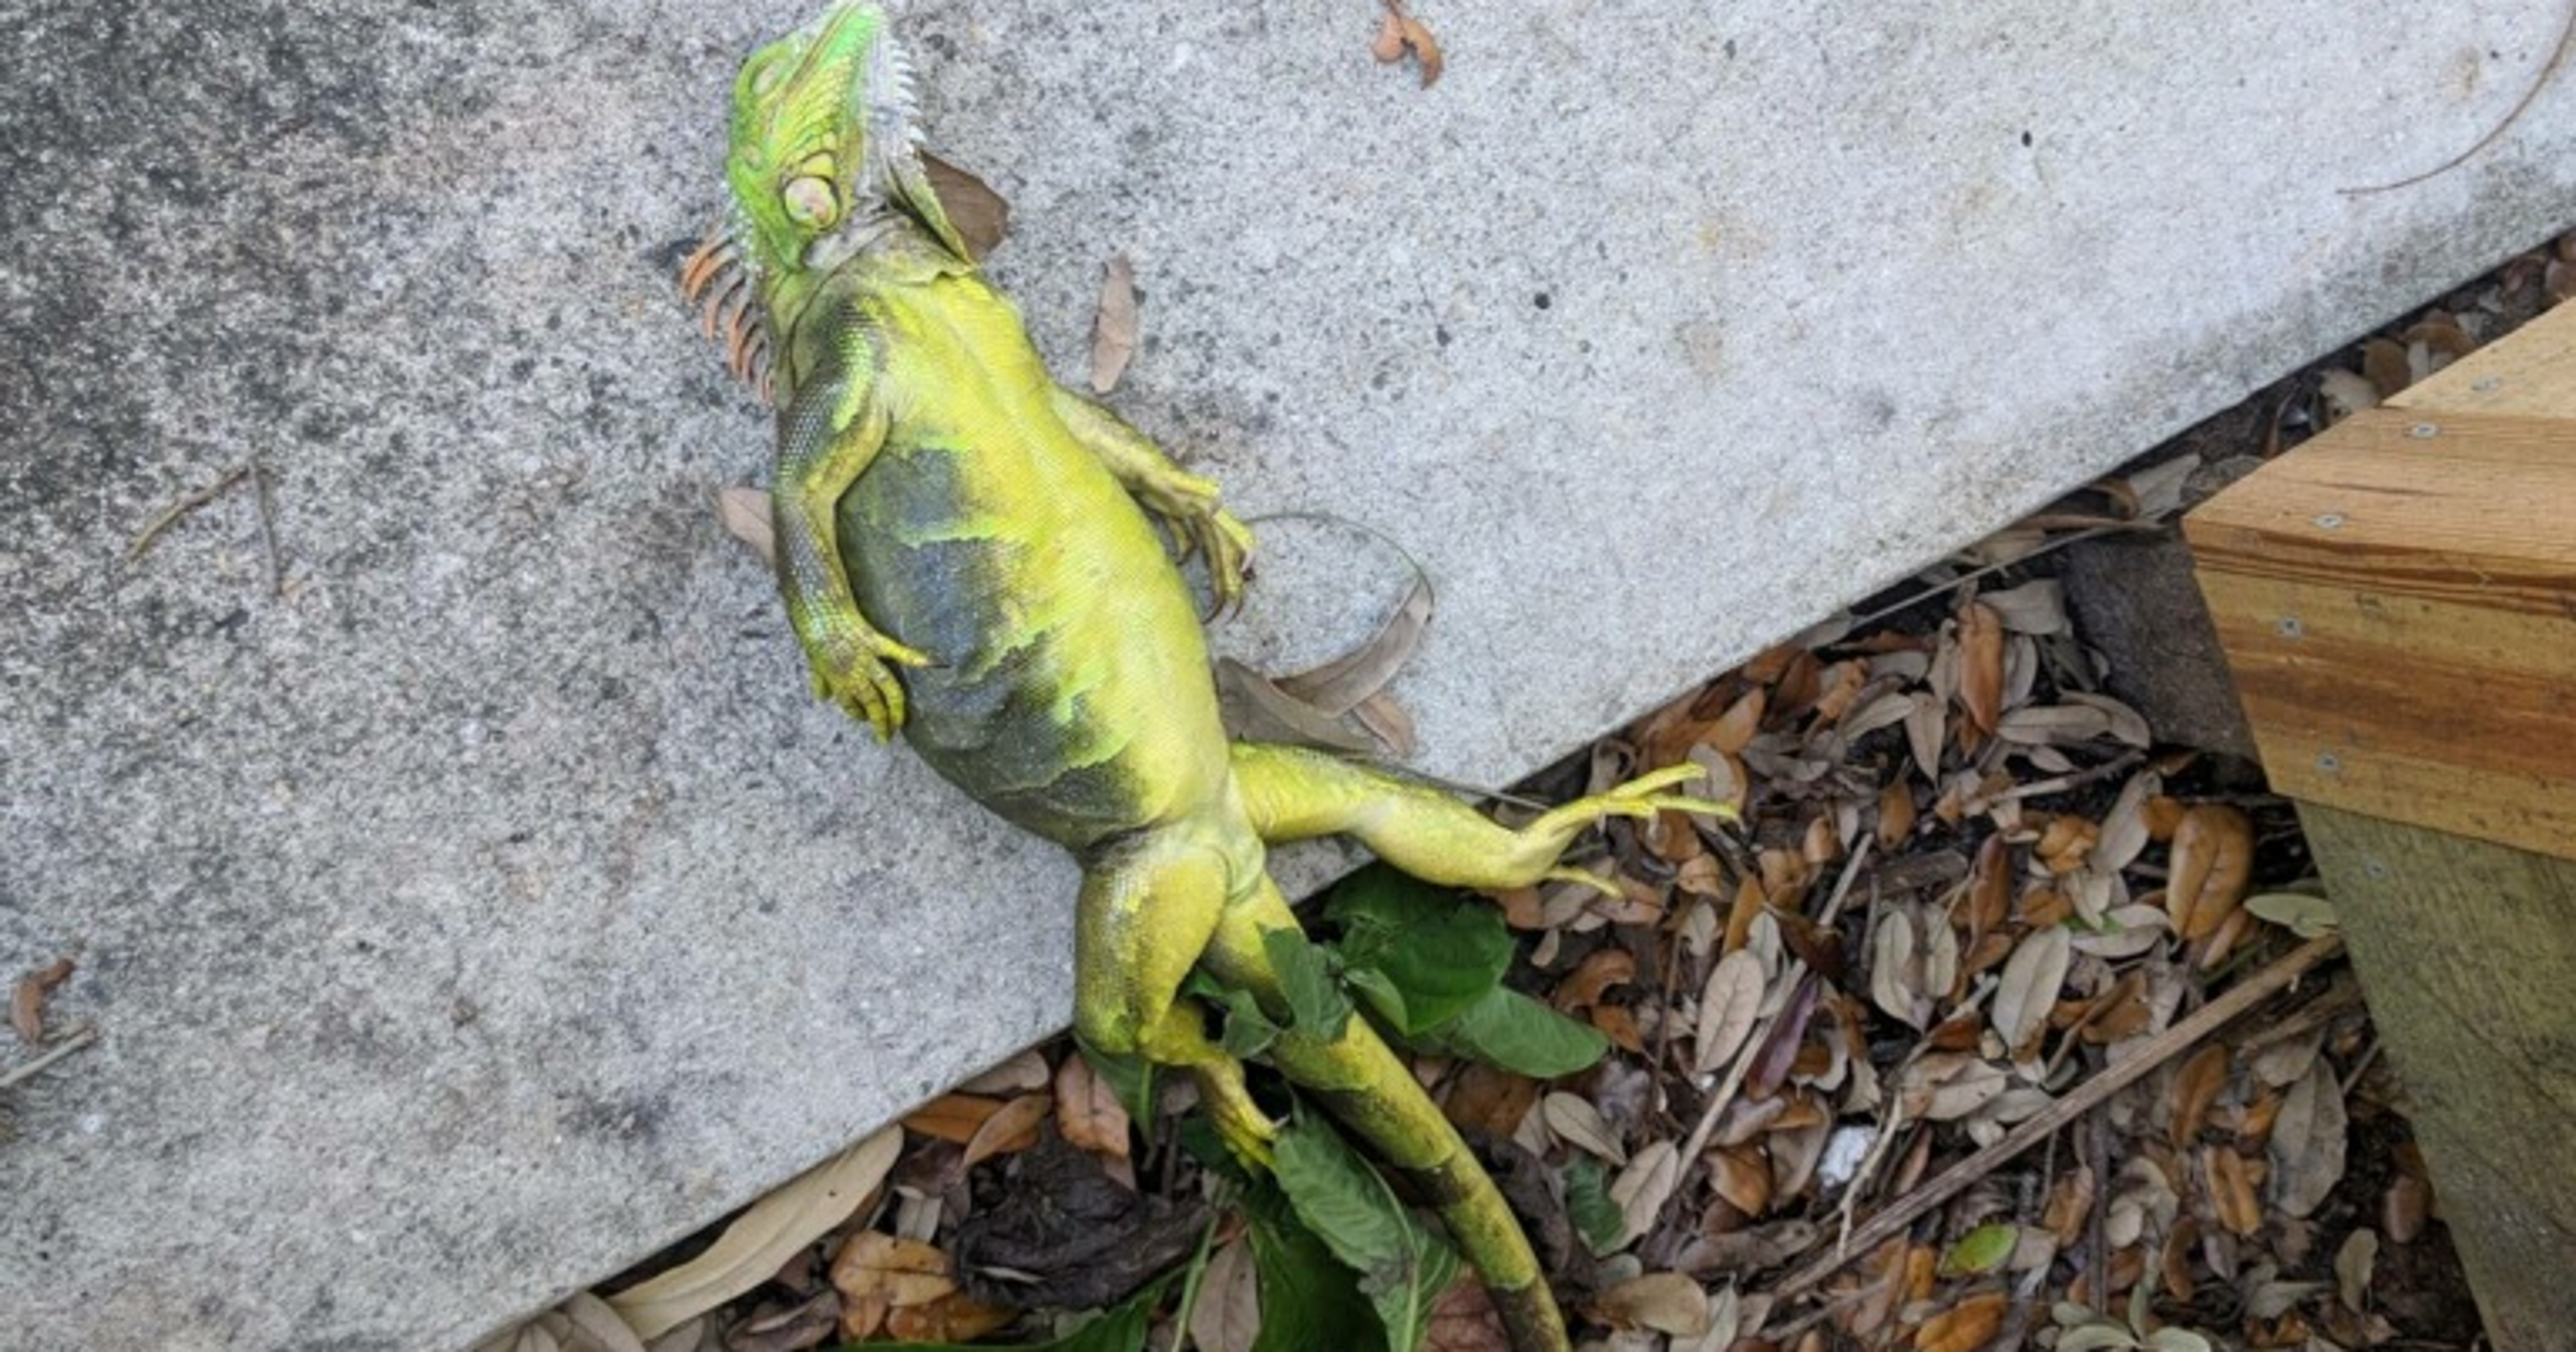 It's so cold in Florida, iguanas are falling from trees3200 x 1680